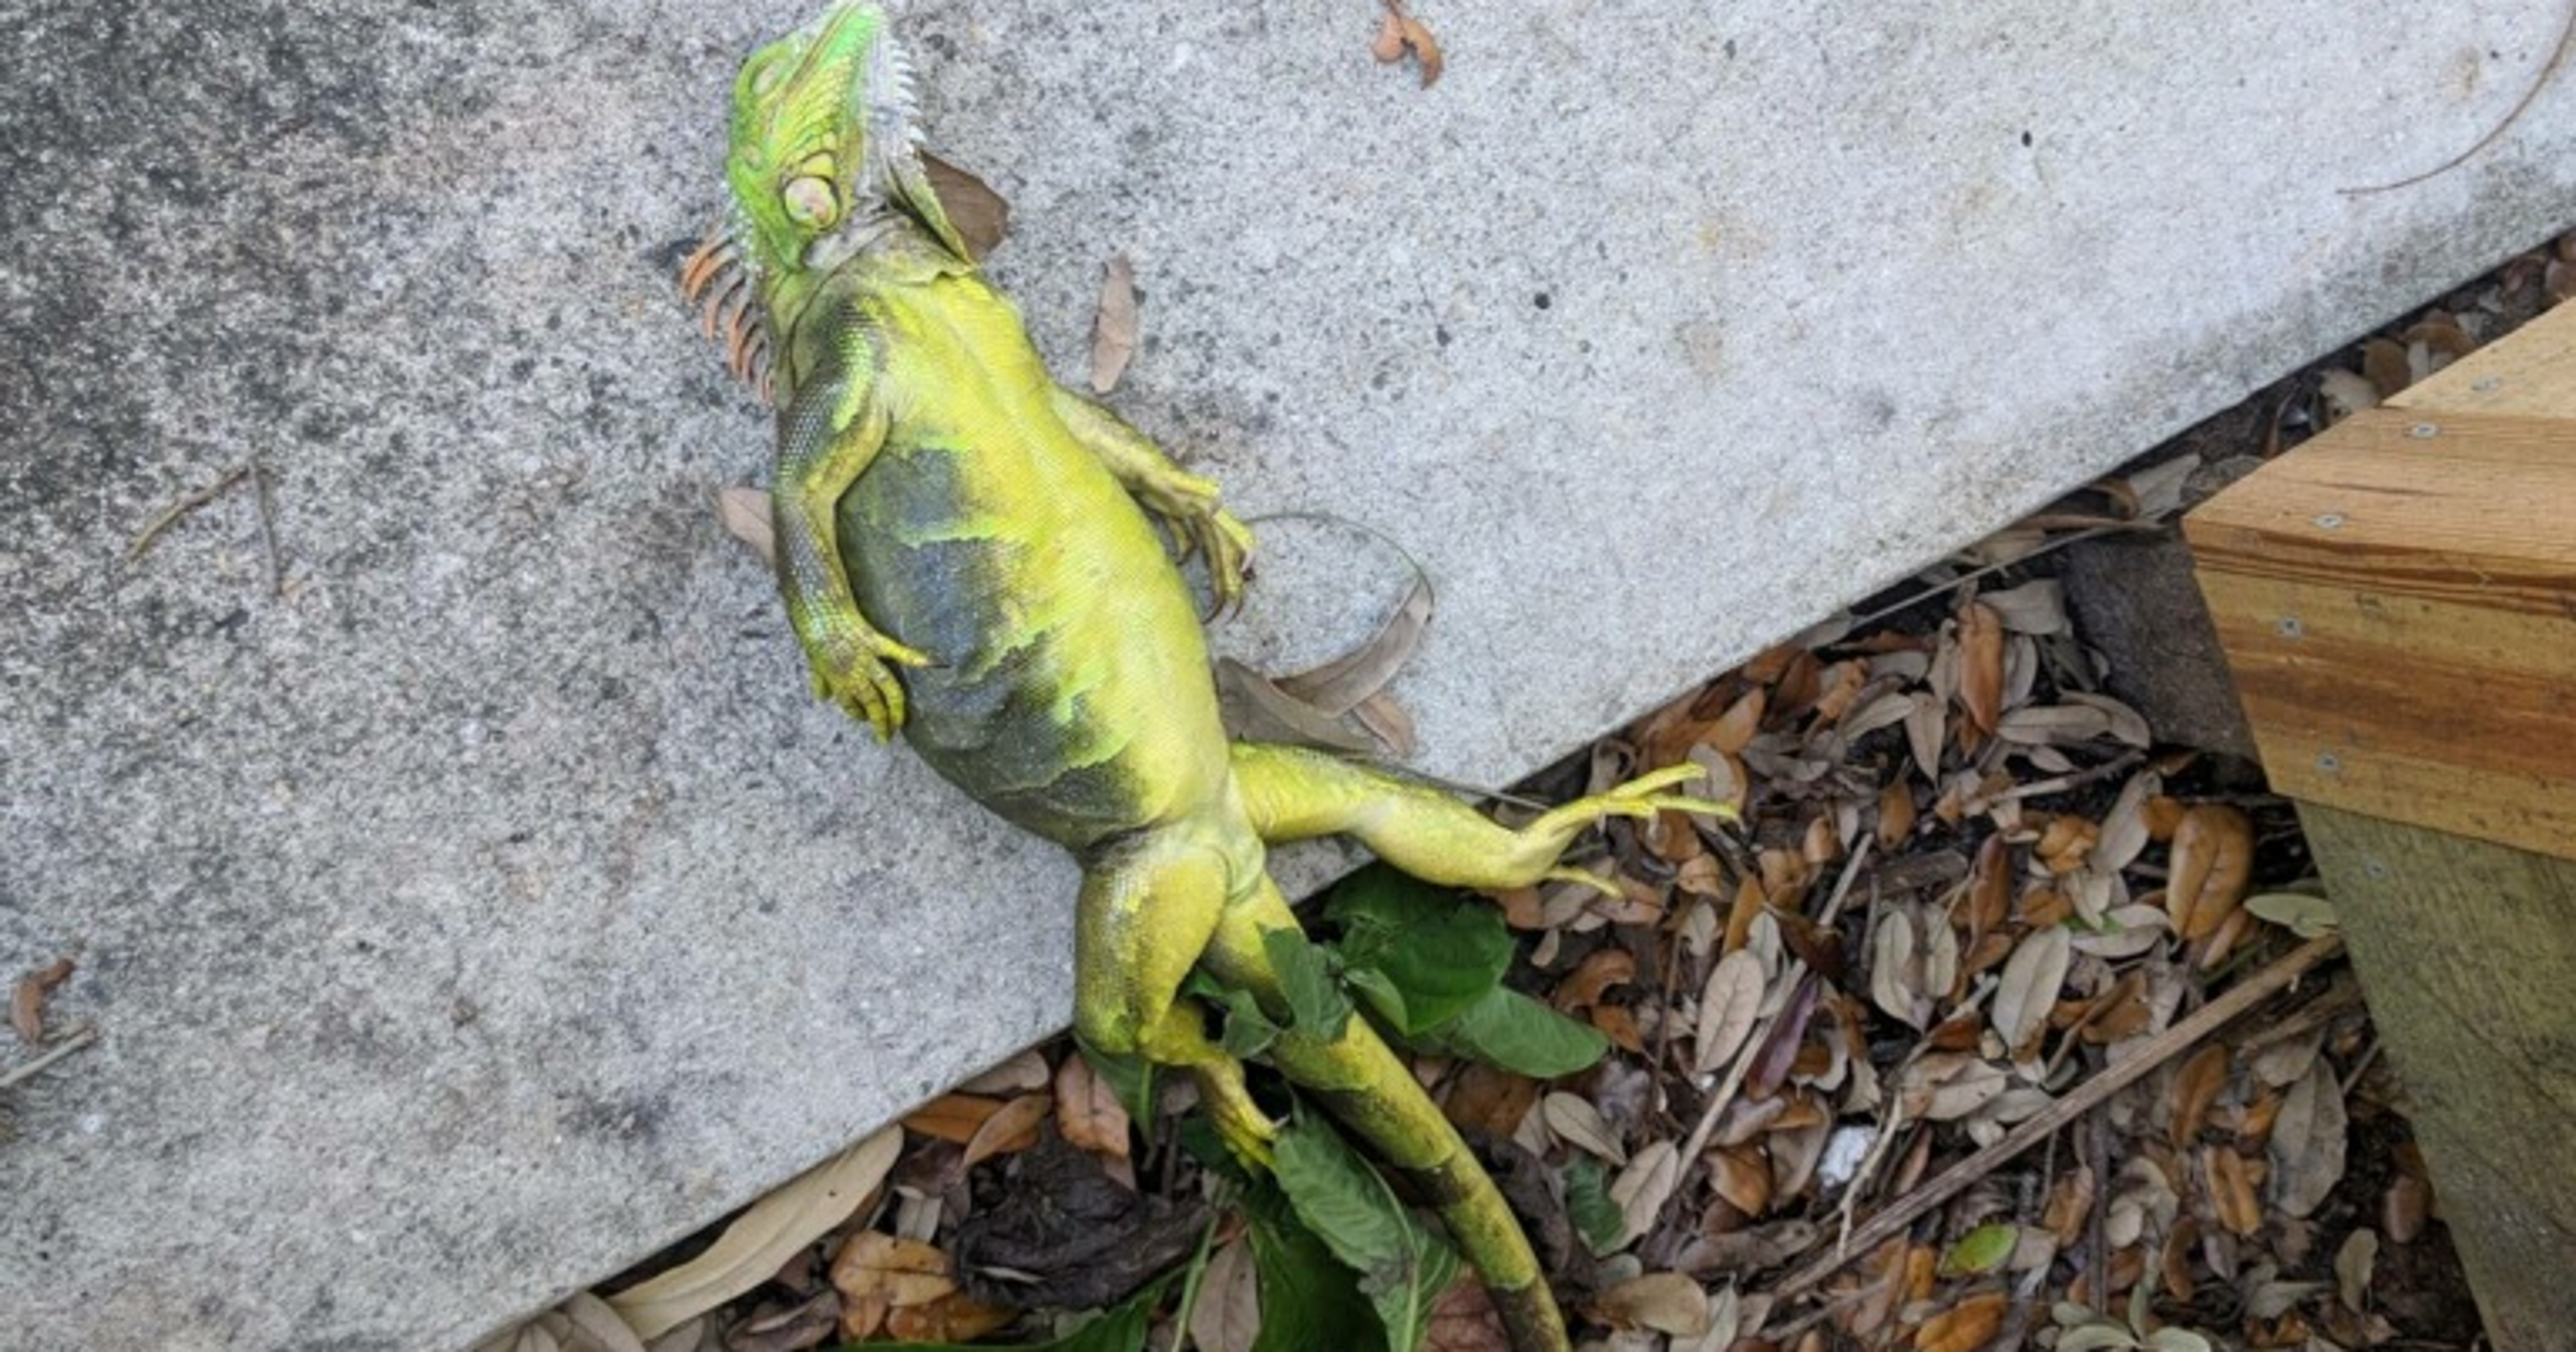 It's so cold in Florida, iguanas are falling from trees3200 x 1680